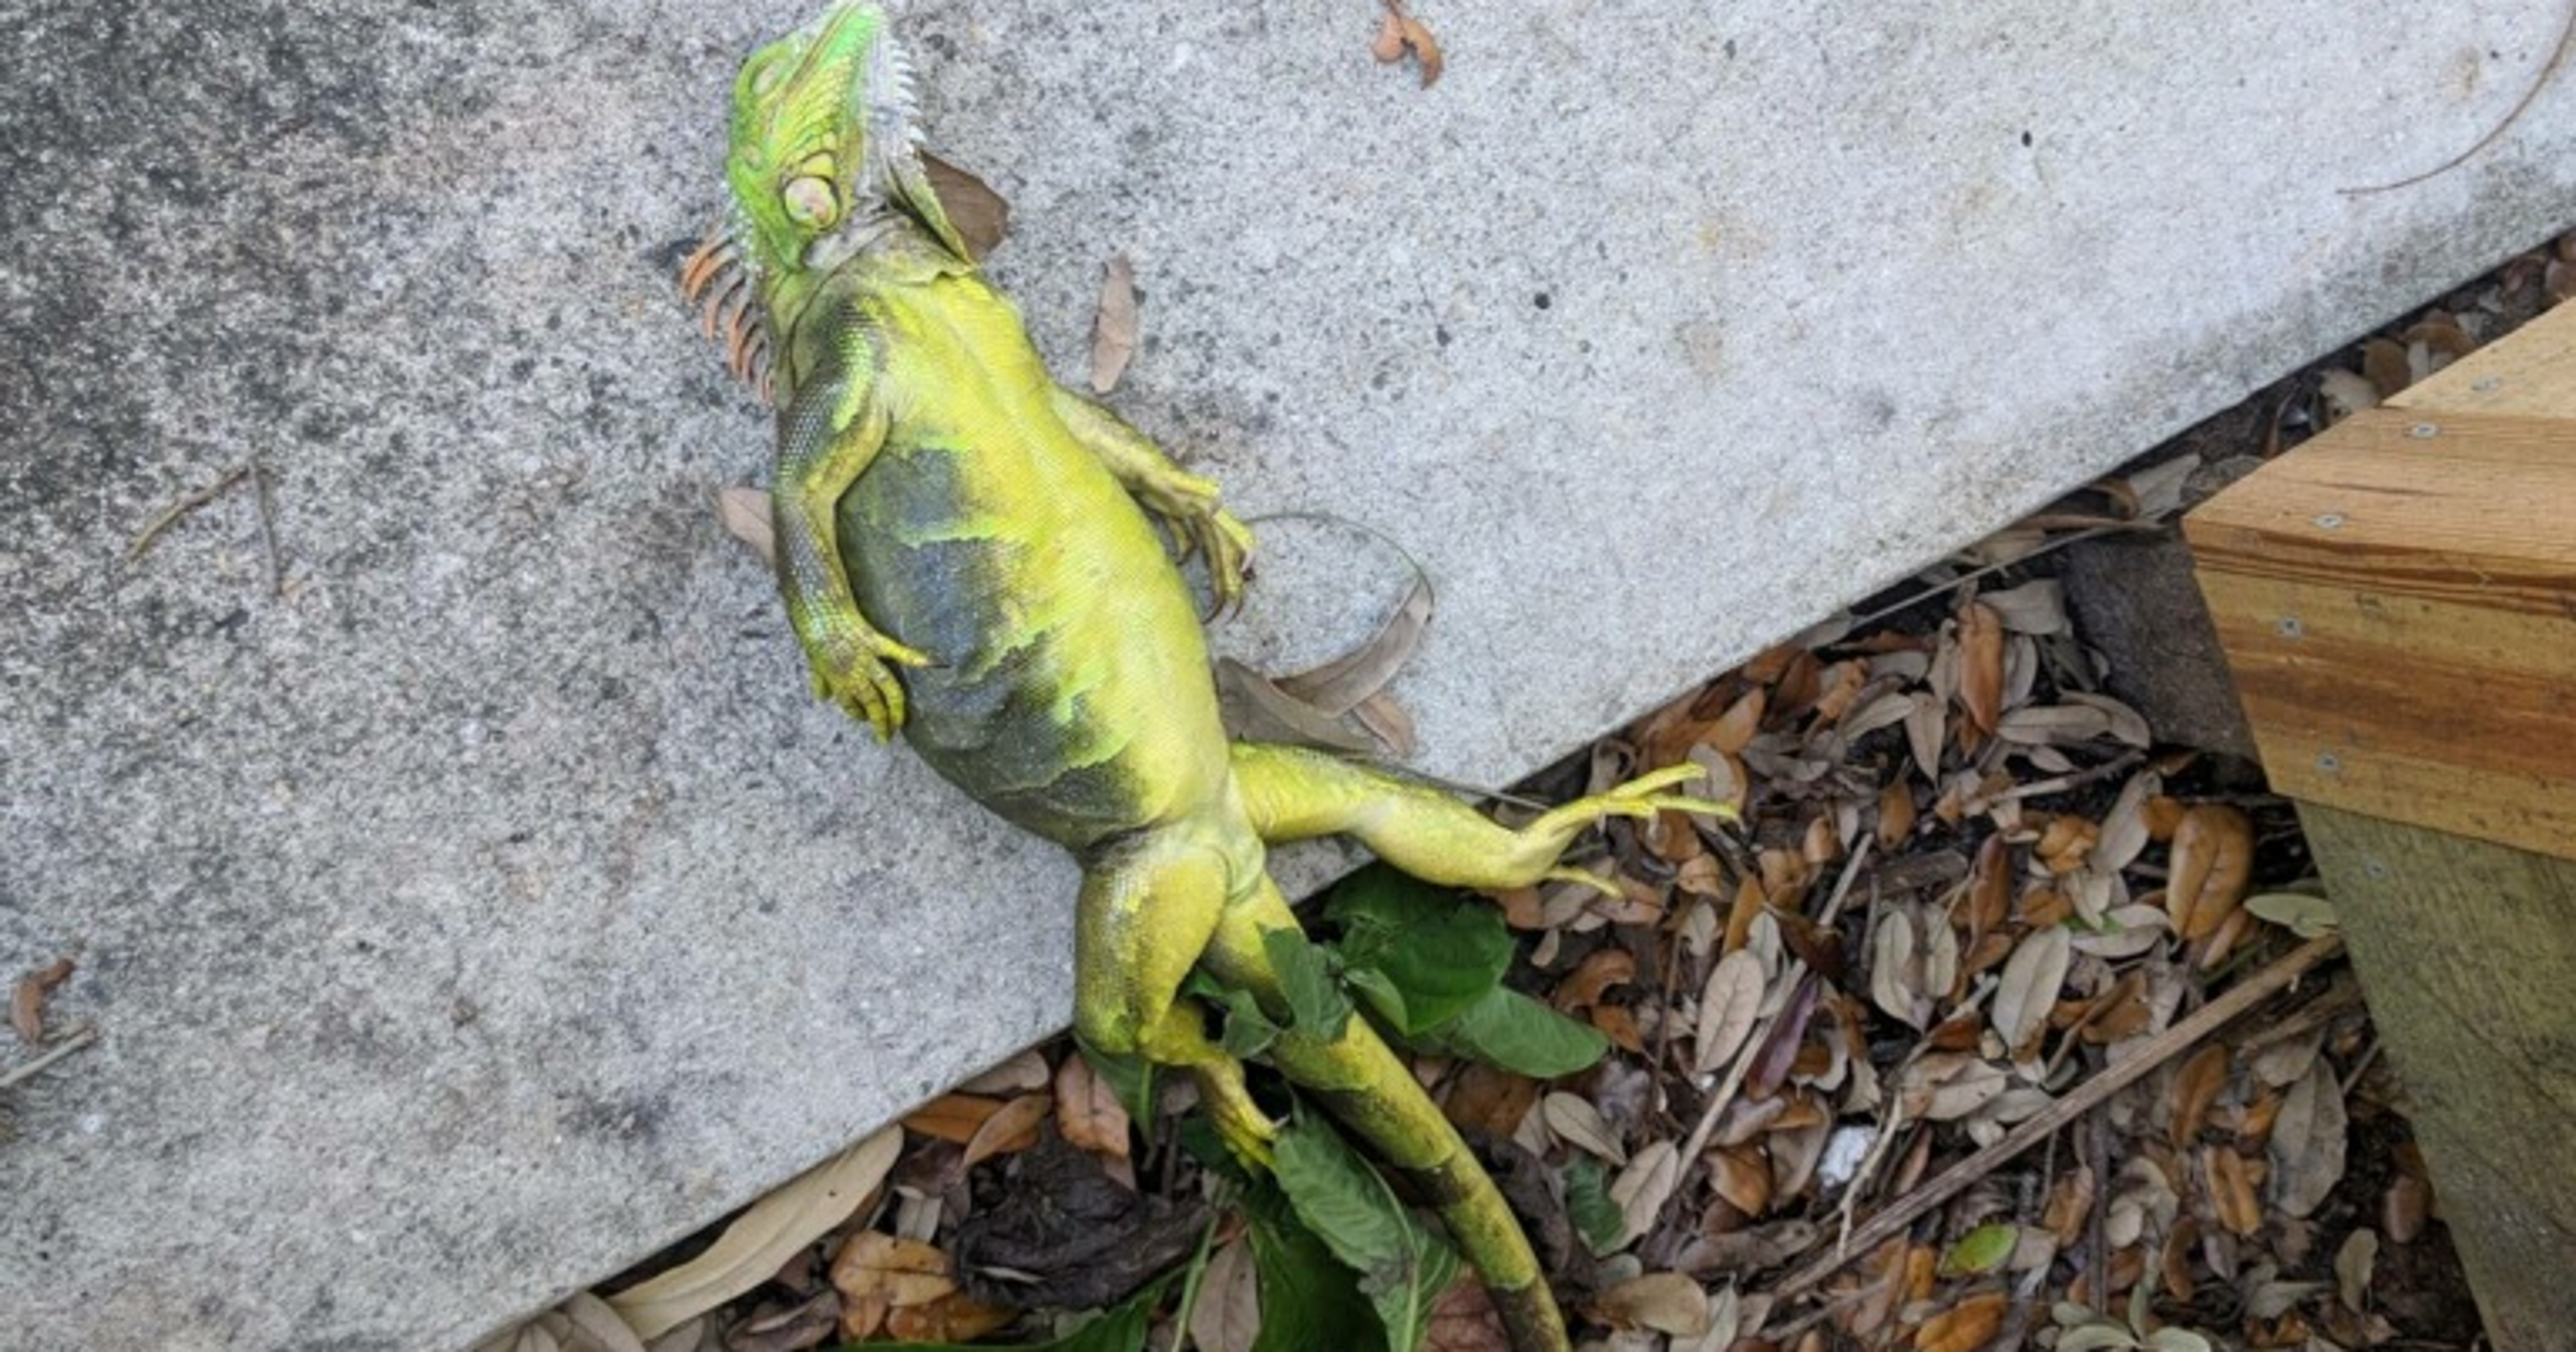 It's so cold in Florida, iguanas are falling from trees3200 x 1680